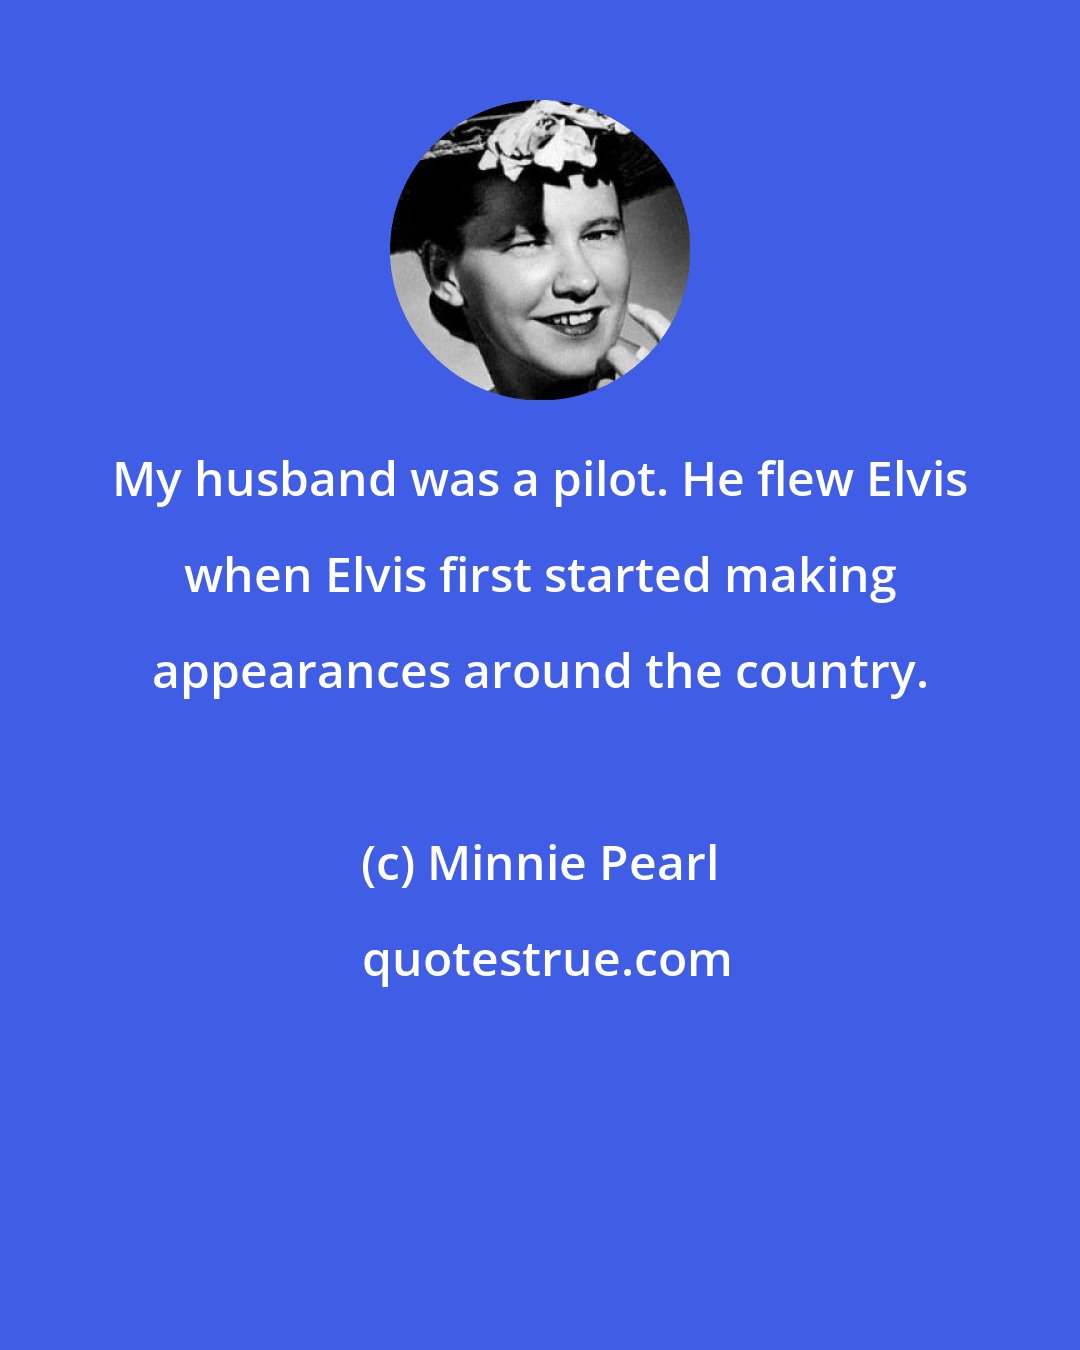 Minnie Pearl: My husband was a pilot. He flew Elvis when Elvis first started making appearances around the country.